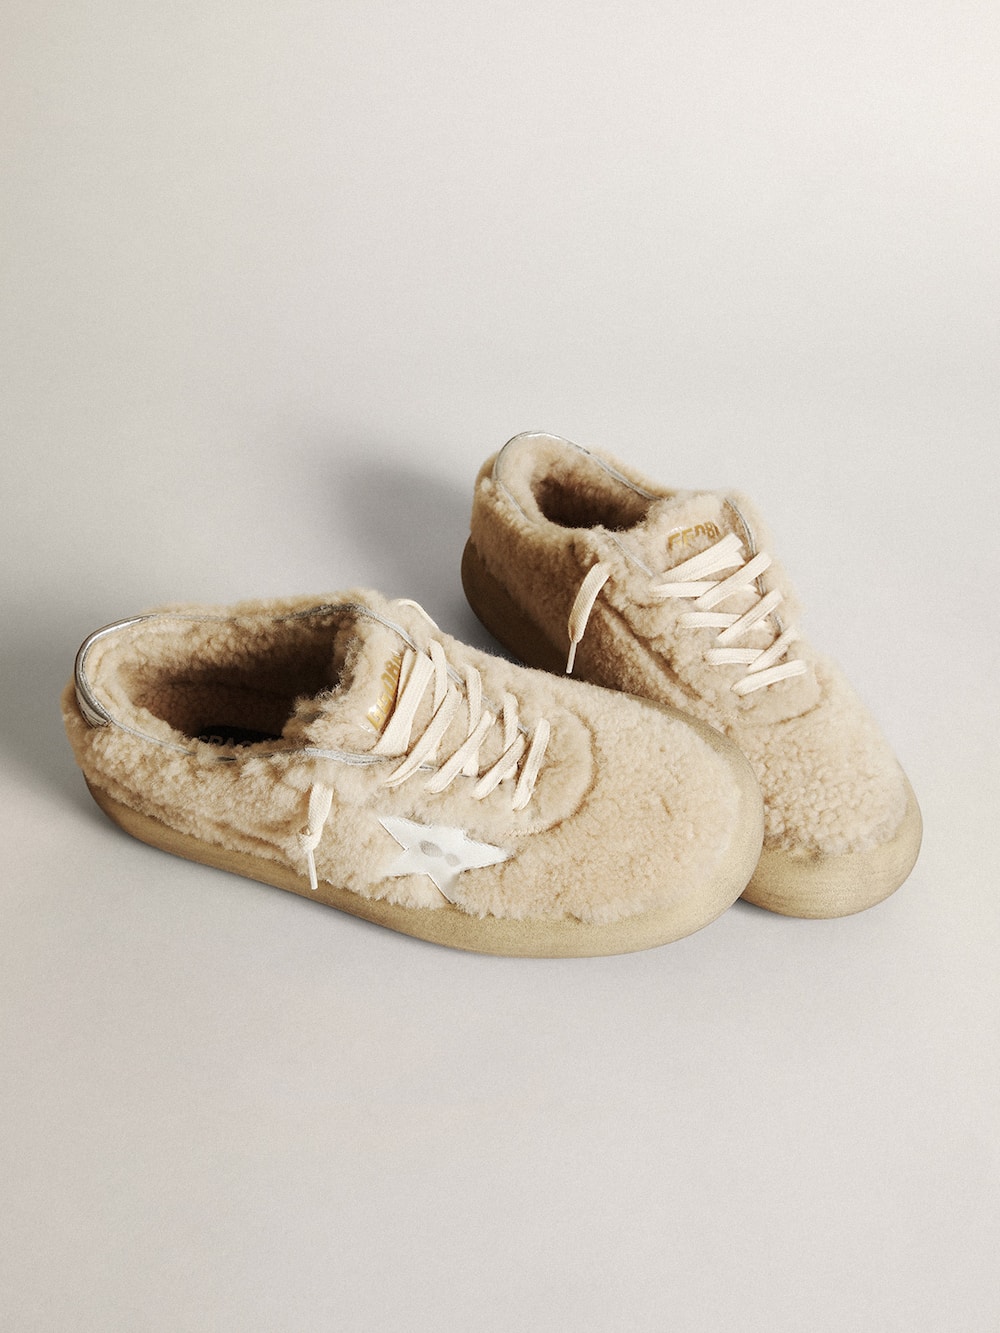 Golden Goose - Men’s Space-Star shoes in beige shearling with white leather star and metallic leather heel tab in 